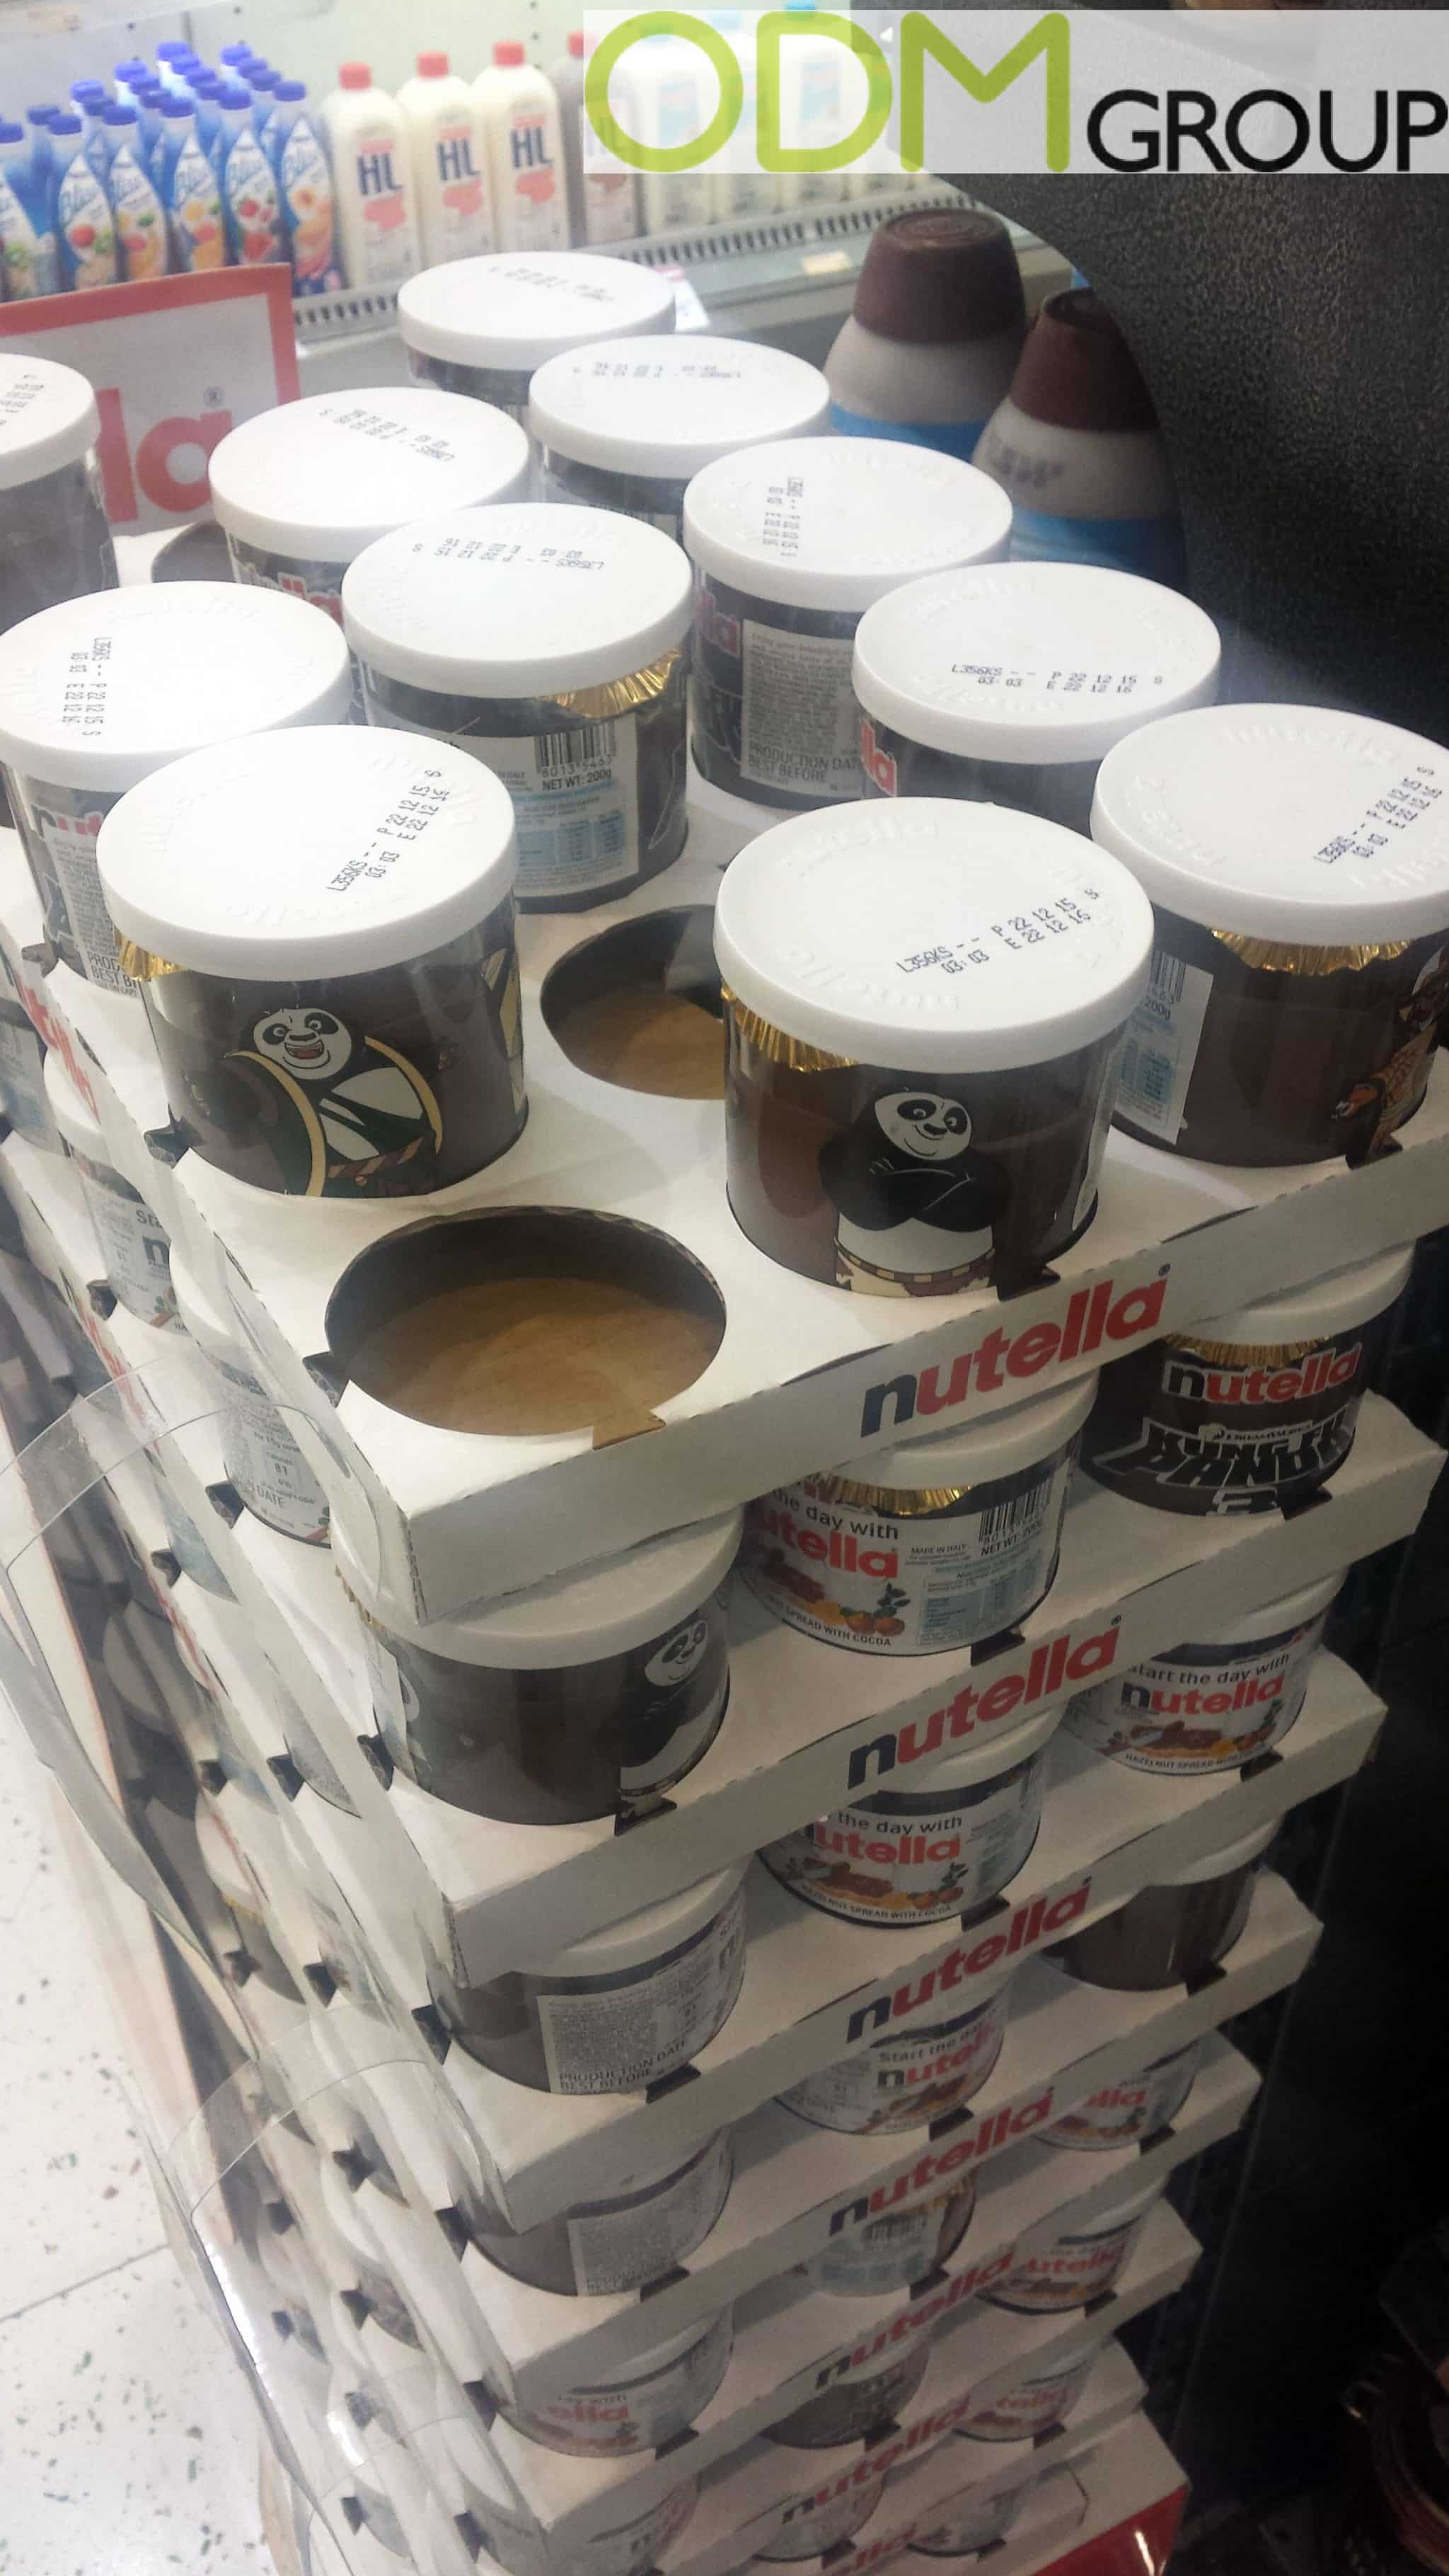 Get Collecting with this Kung Fu Panda Promotion by Nutella